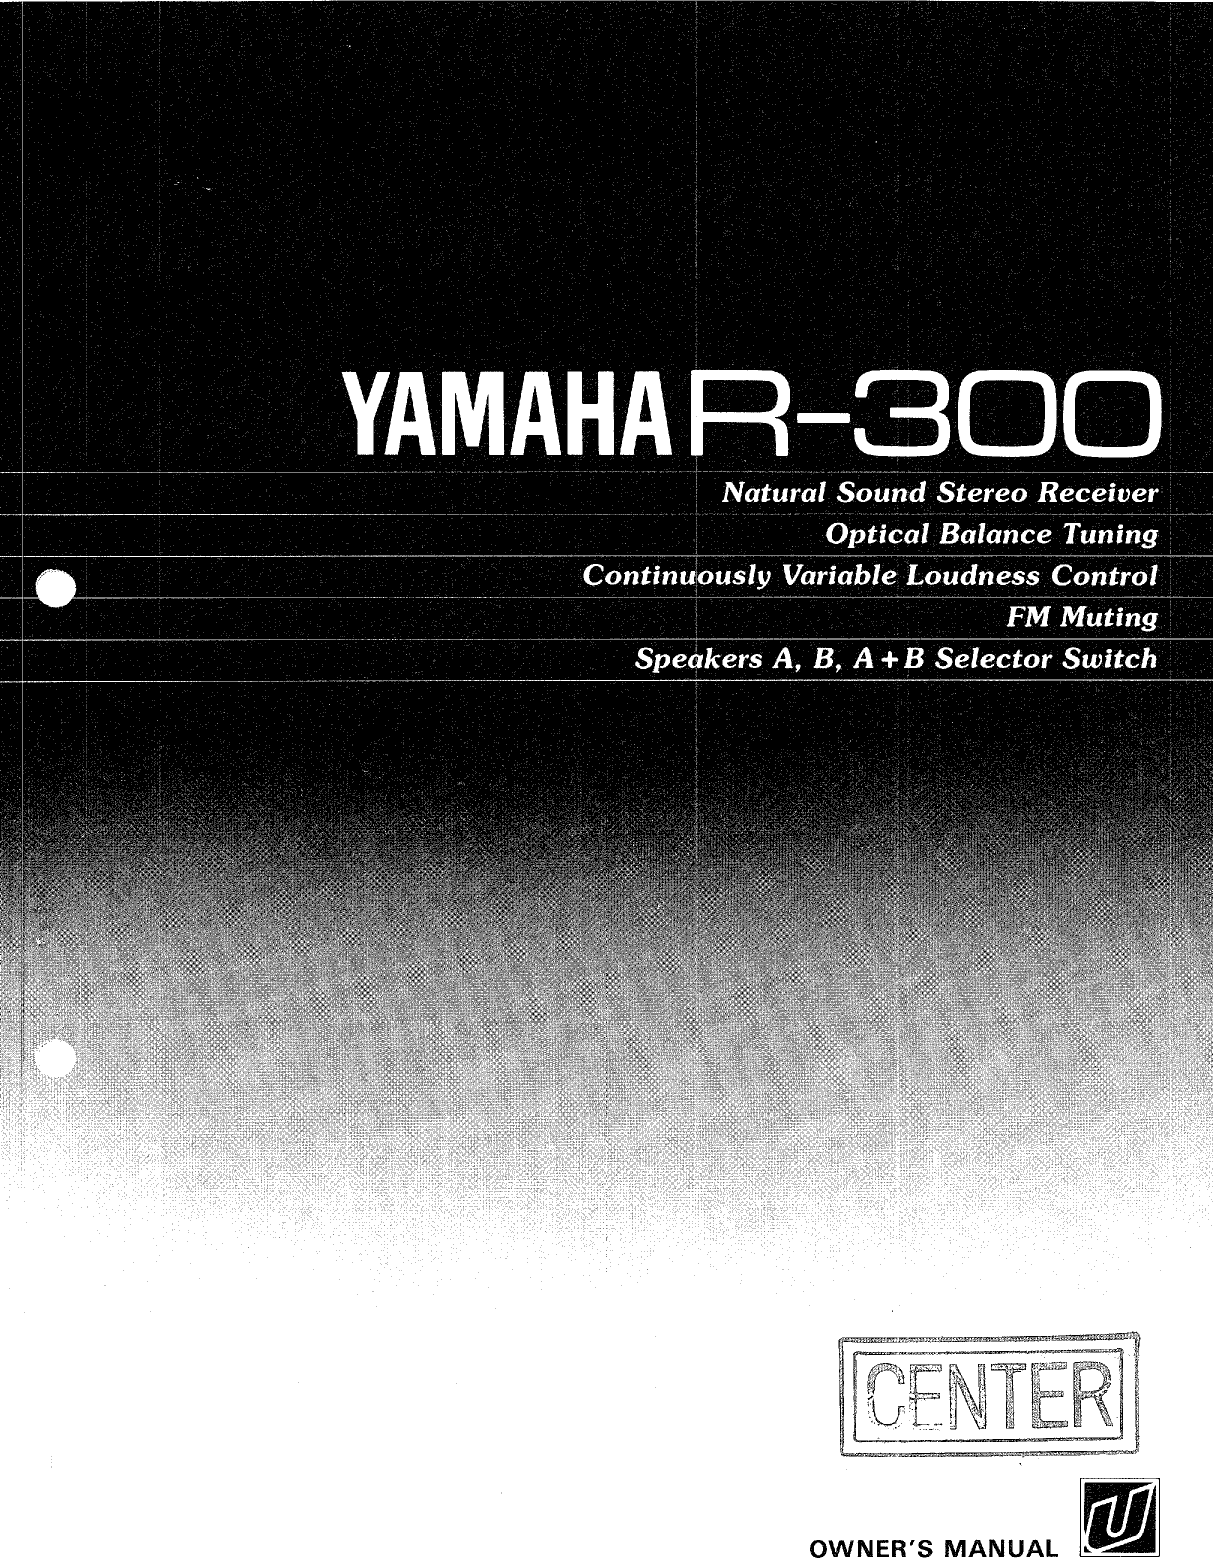 Page 1 of 12 - Yamaha .橡.ページ) R-300 OWNER'S MANUAL R300